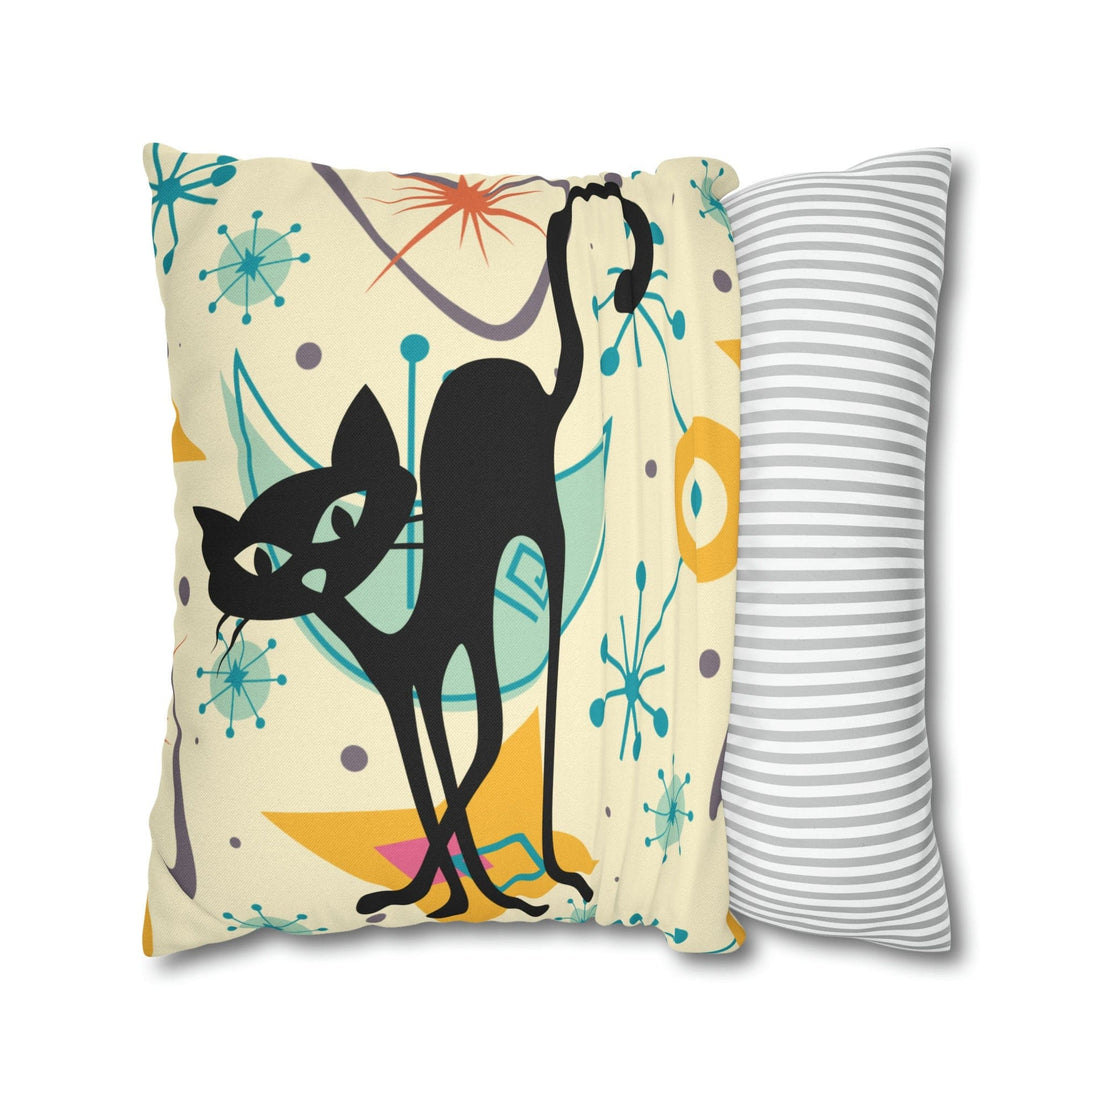 Kate McEnroe New York Retro Kitschy Cat Mid Mod Boomerang Starbursts Pillow Cover, Atomic MCM Cushion Covers, Mid Century Modern Living Room, Bedroom DecorThrow Pillow Covers14834527219432125024